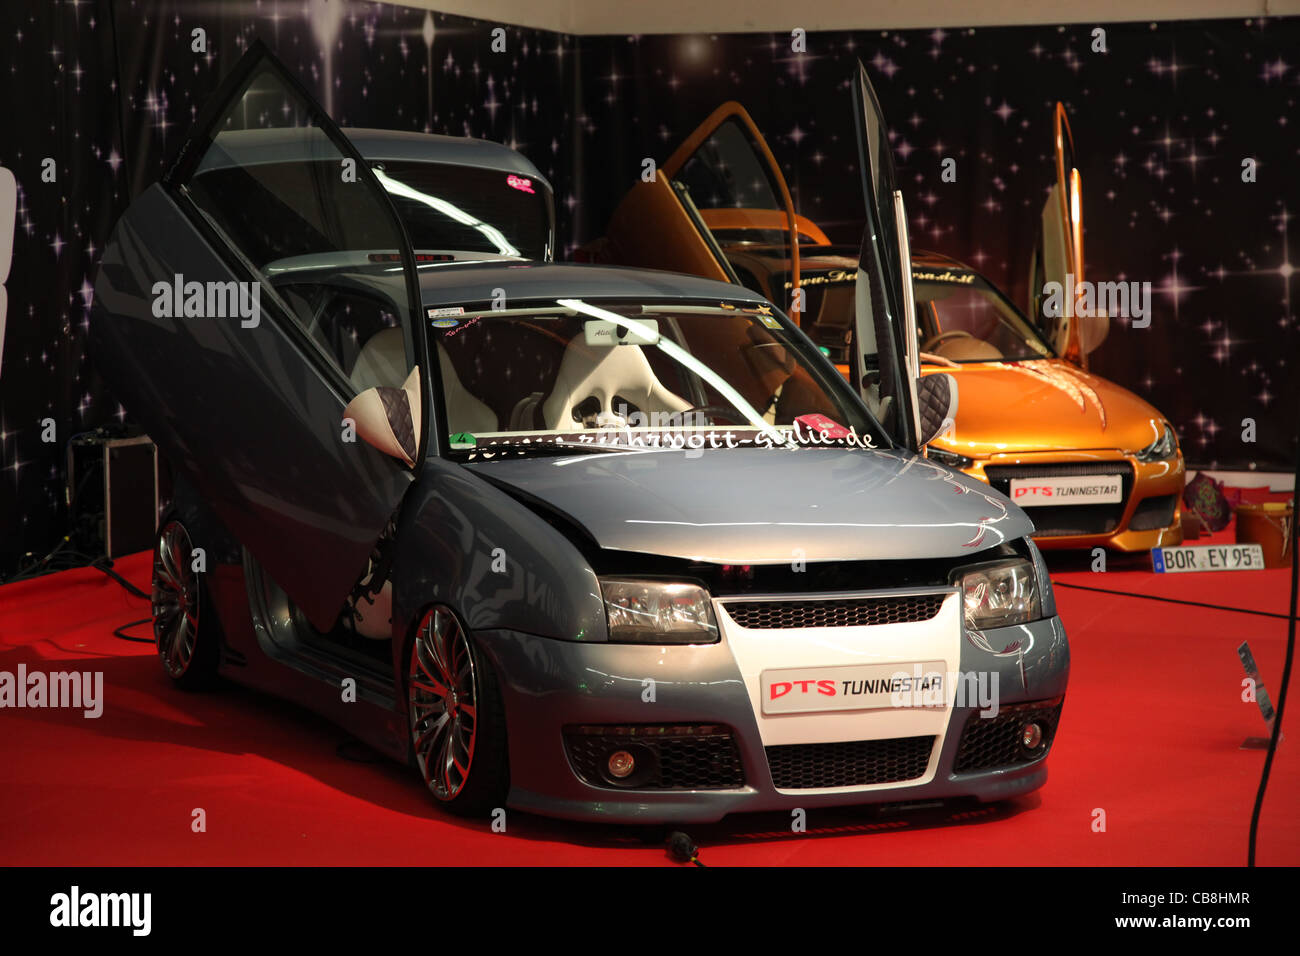 VW Lupo with gull-wing doors from DTS Tuningstar shown at the Essen Motor Show in Essen, Germany, on No Stock Photo